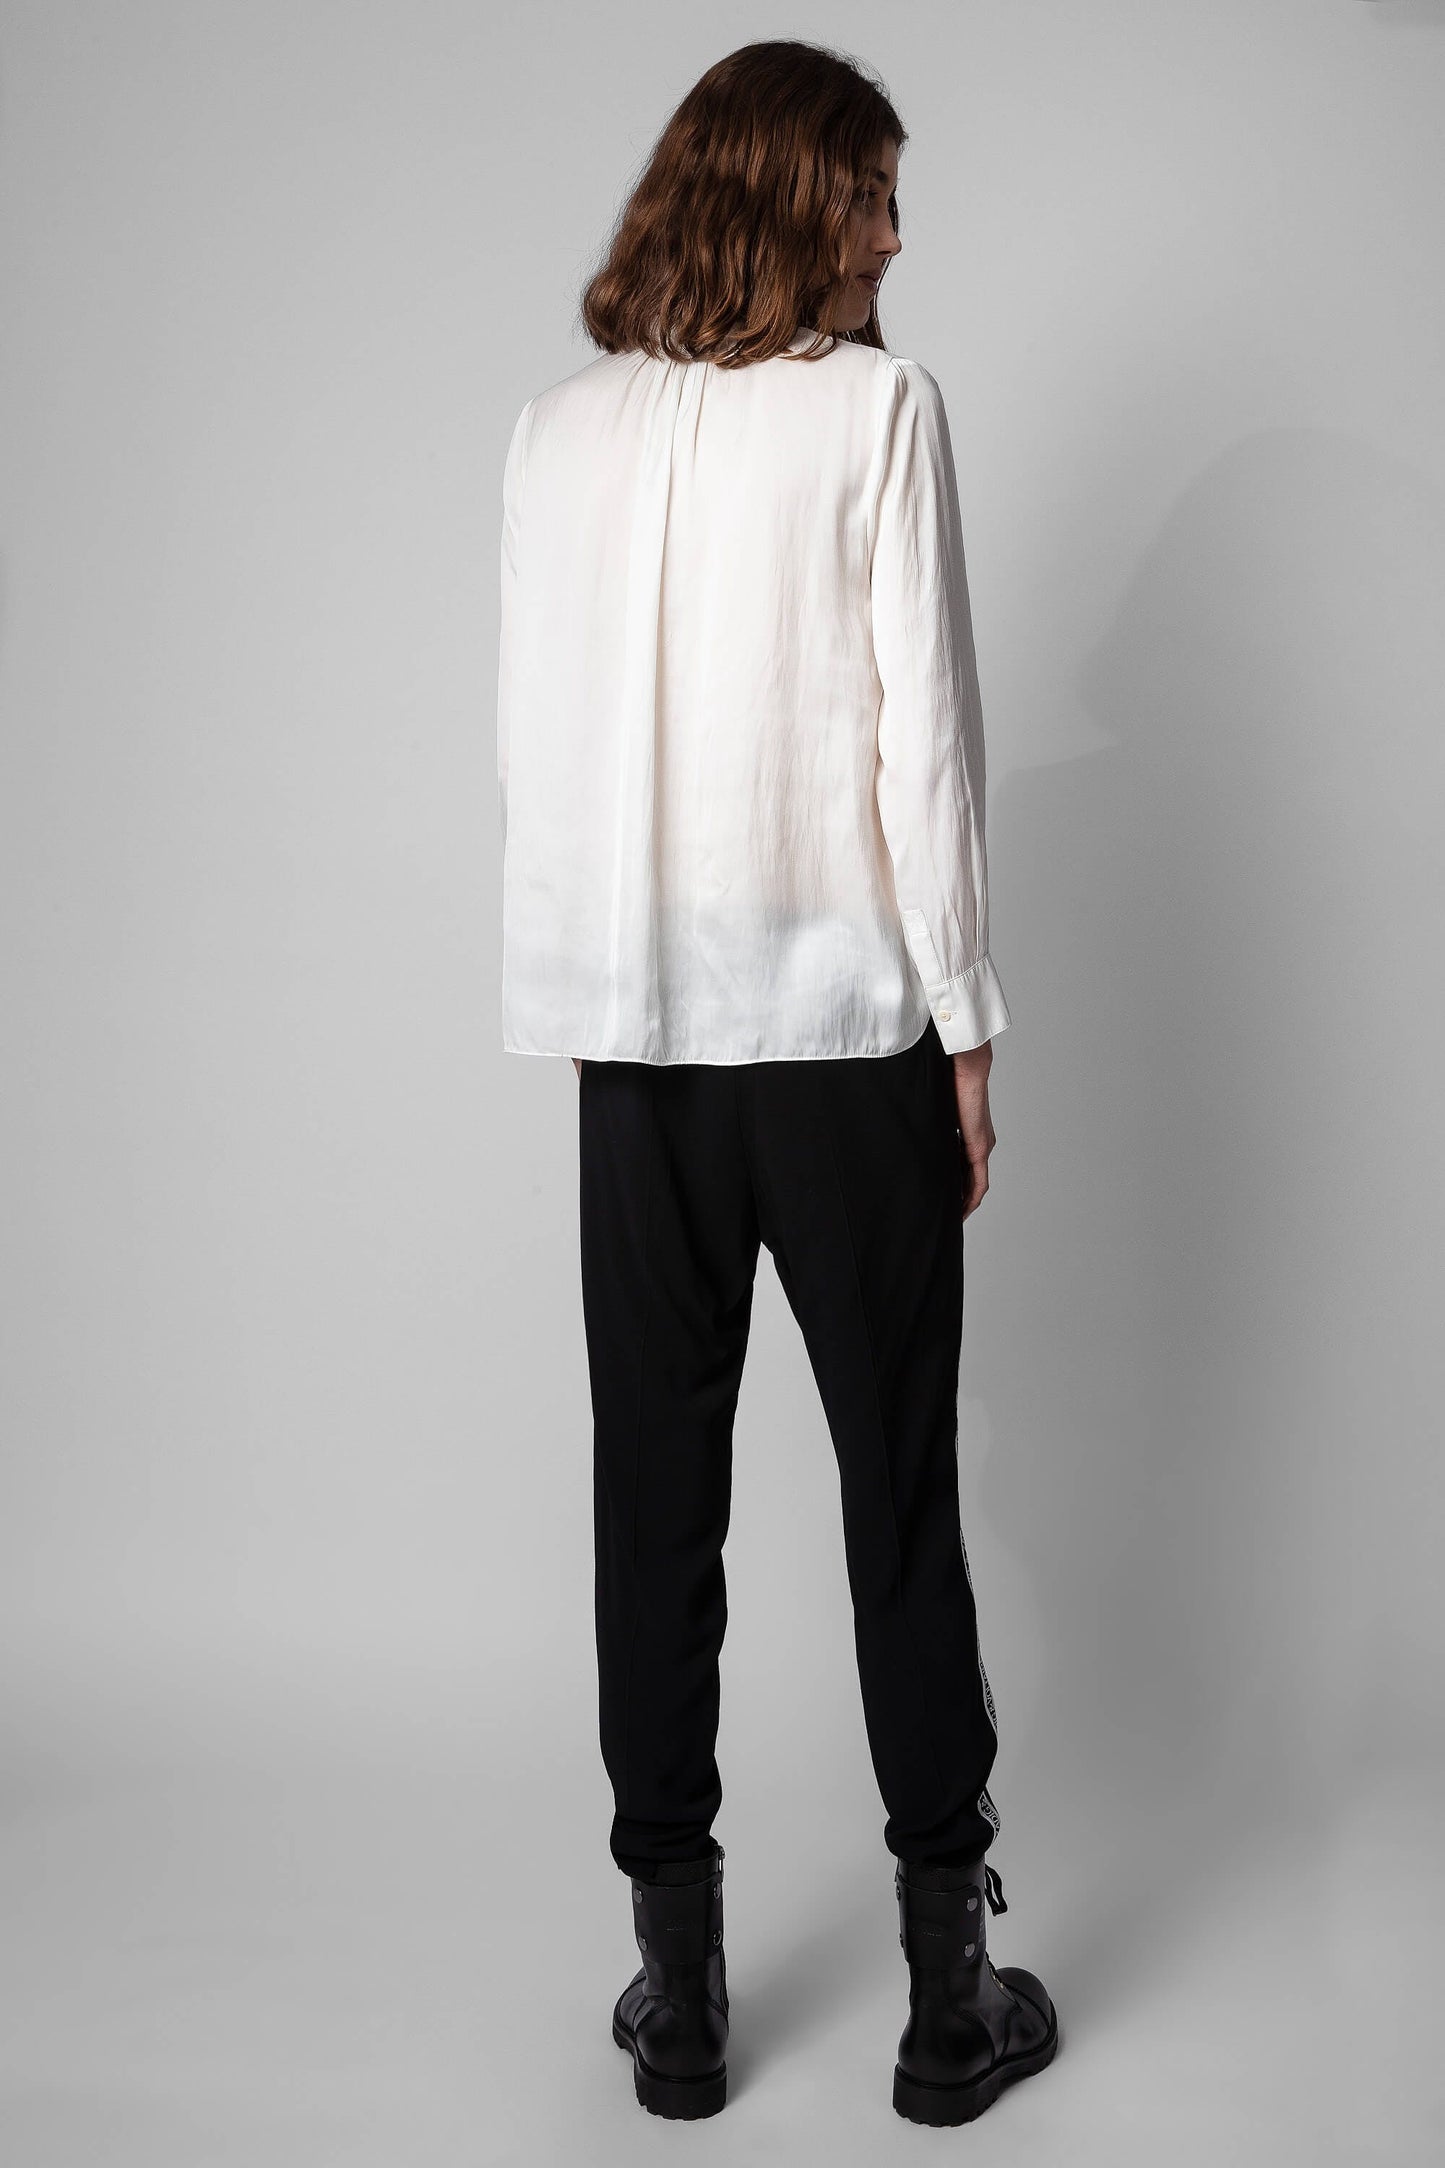 Tink Satin Shirt  in Blanc white by ZADIG - SALE